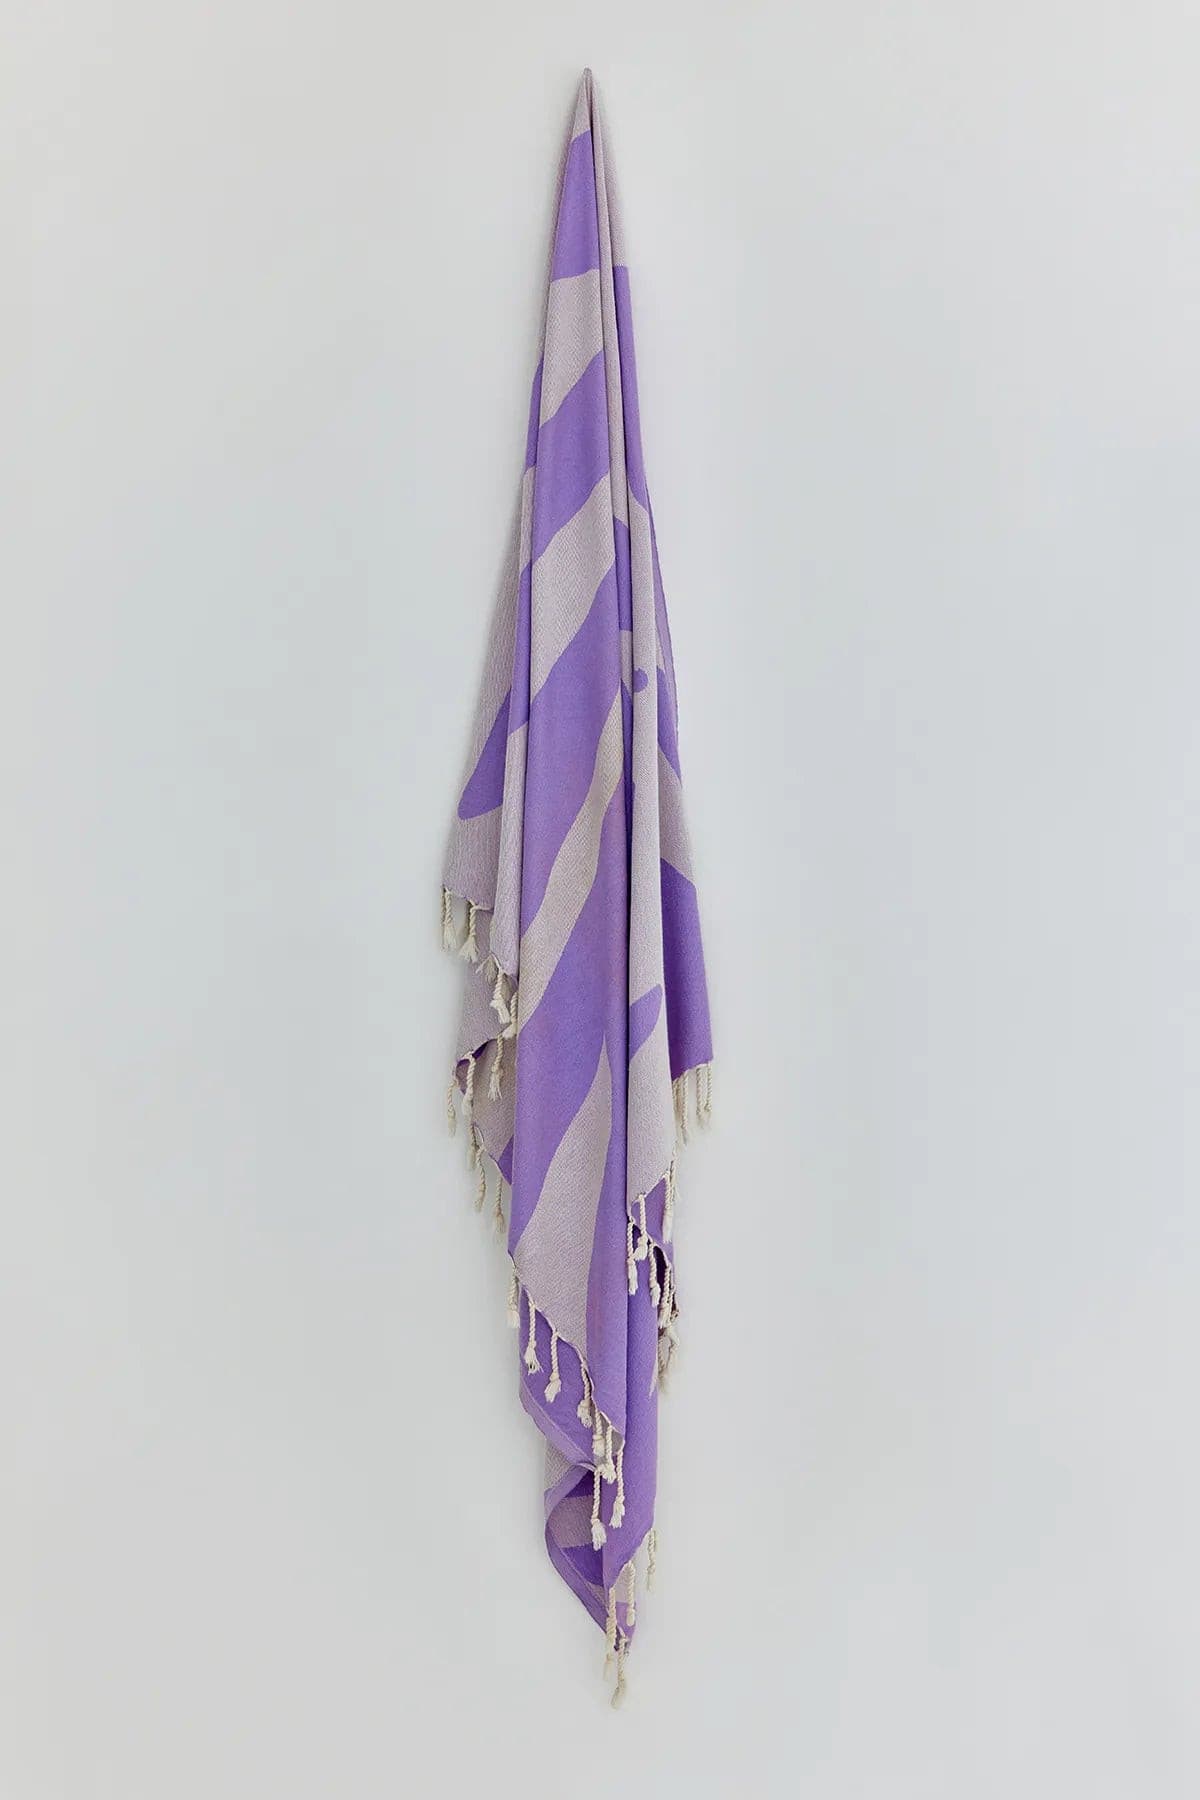 Beach/Bath,living place,Lilac,Turkish towel,hanged,summer,line patterned,double-faces,purified sand,light,compact, easy pack,fun, recycled,double color,dimond,eastern flare,breeze,tropical forest